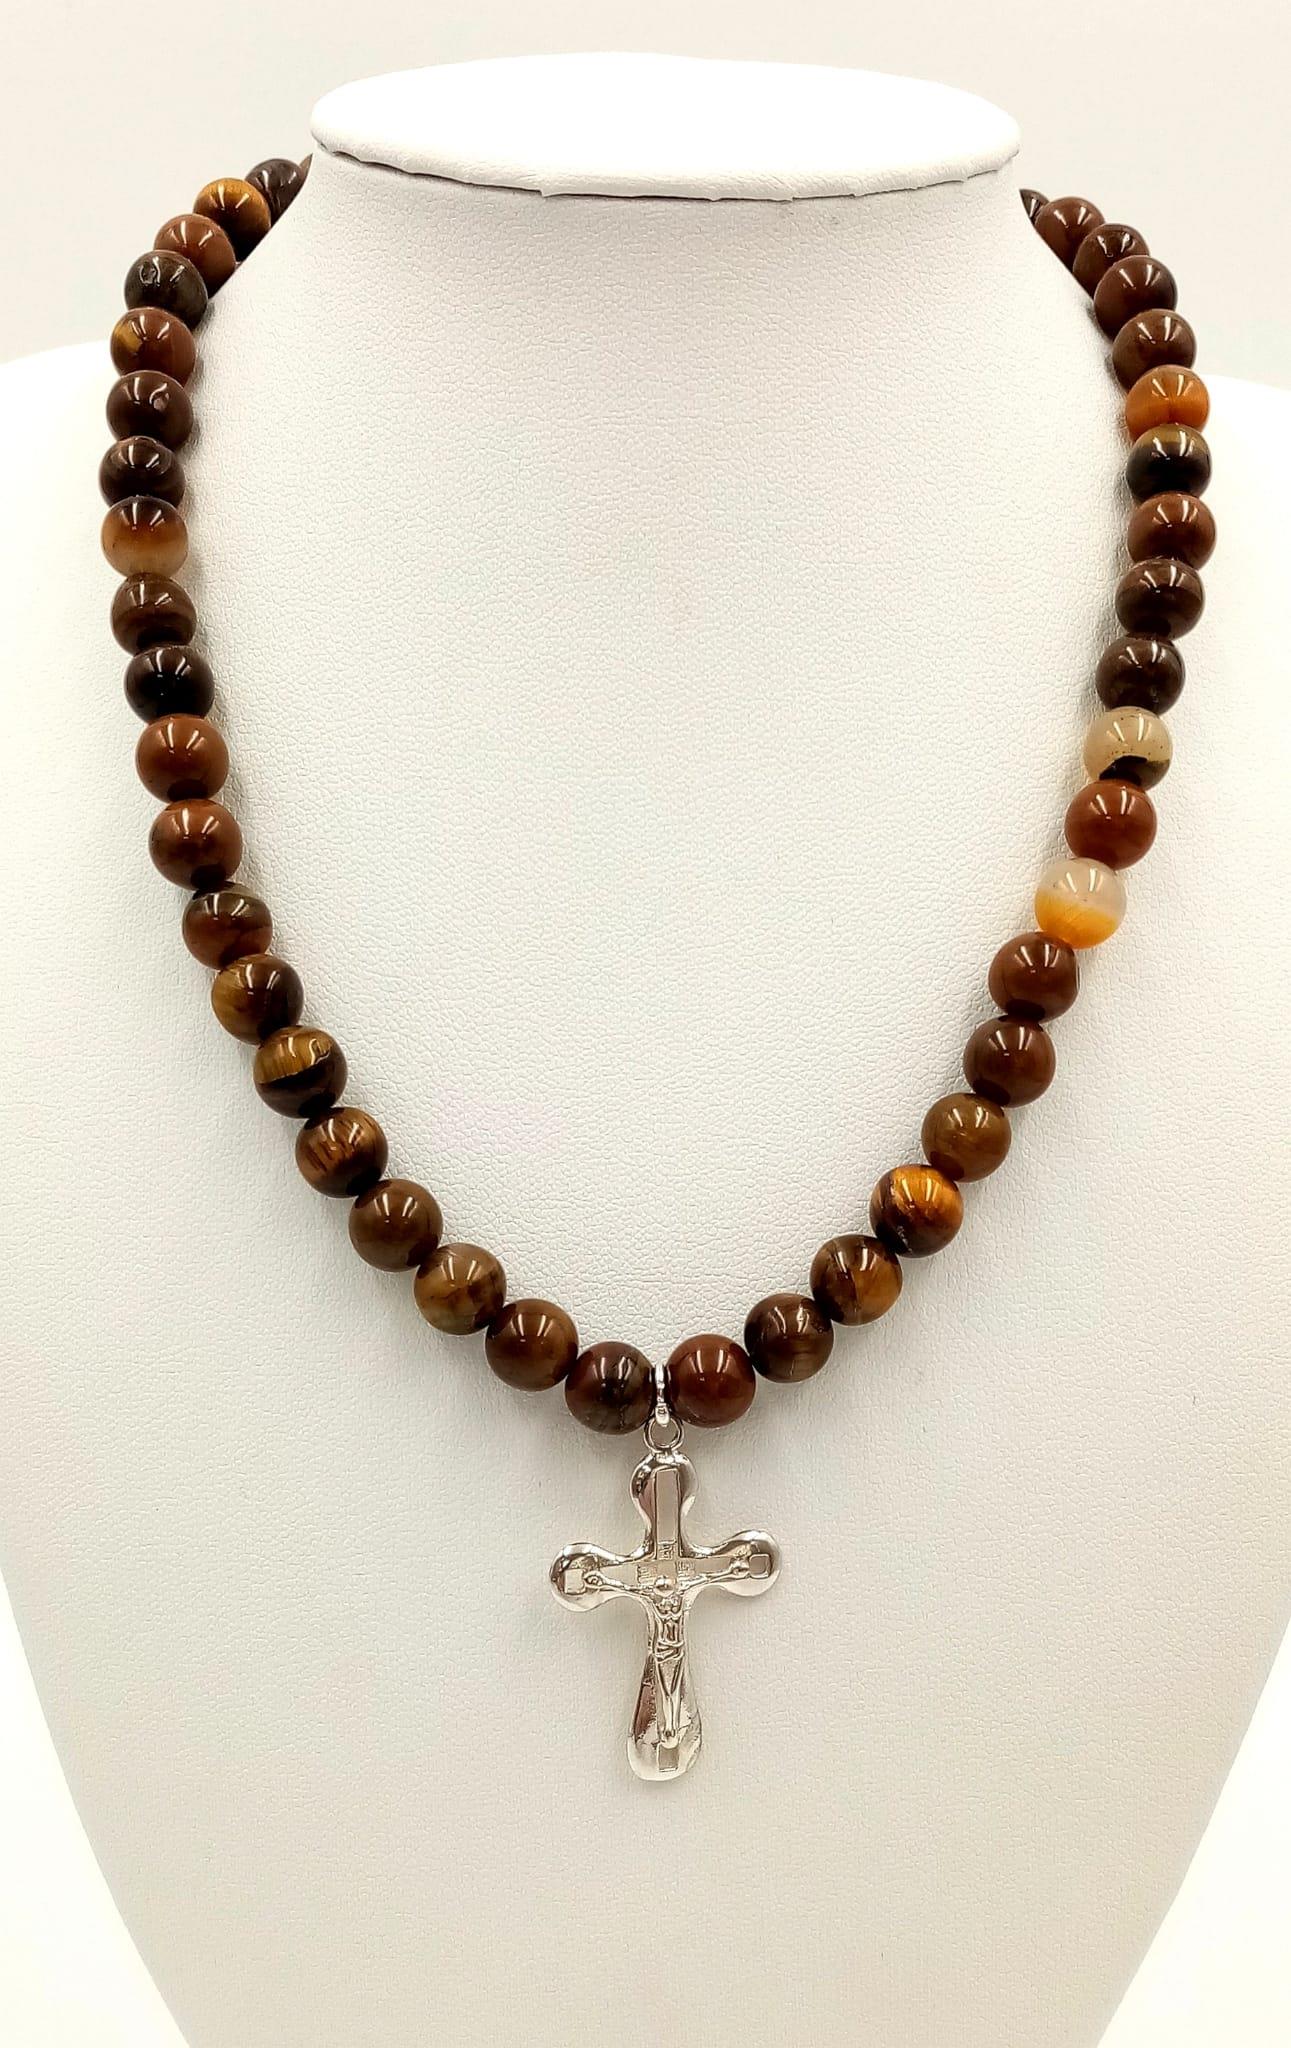 A tiger's eye necklace with a sterling silver cross and clasp. Necklace length: 41 cm, total weight: